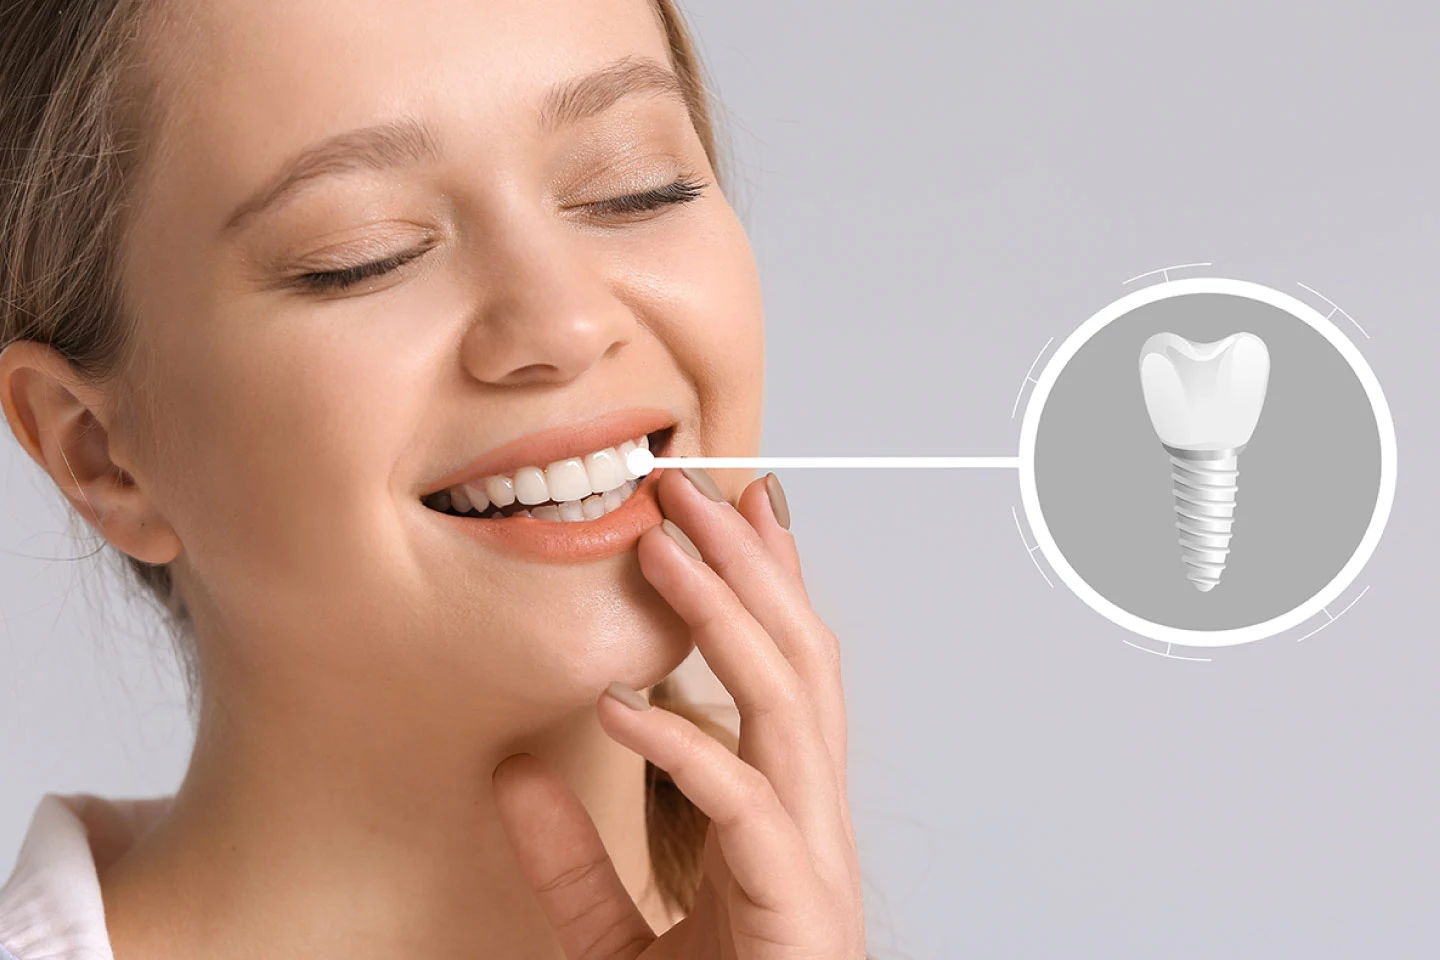 Painless dental implants under the supervision of our expert at Spring Field Dental